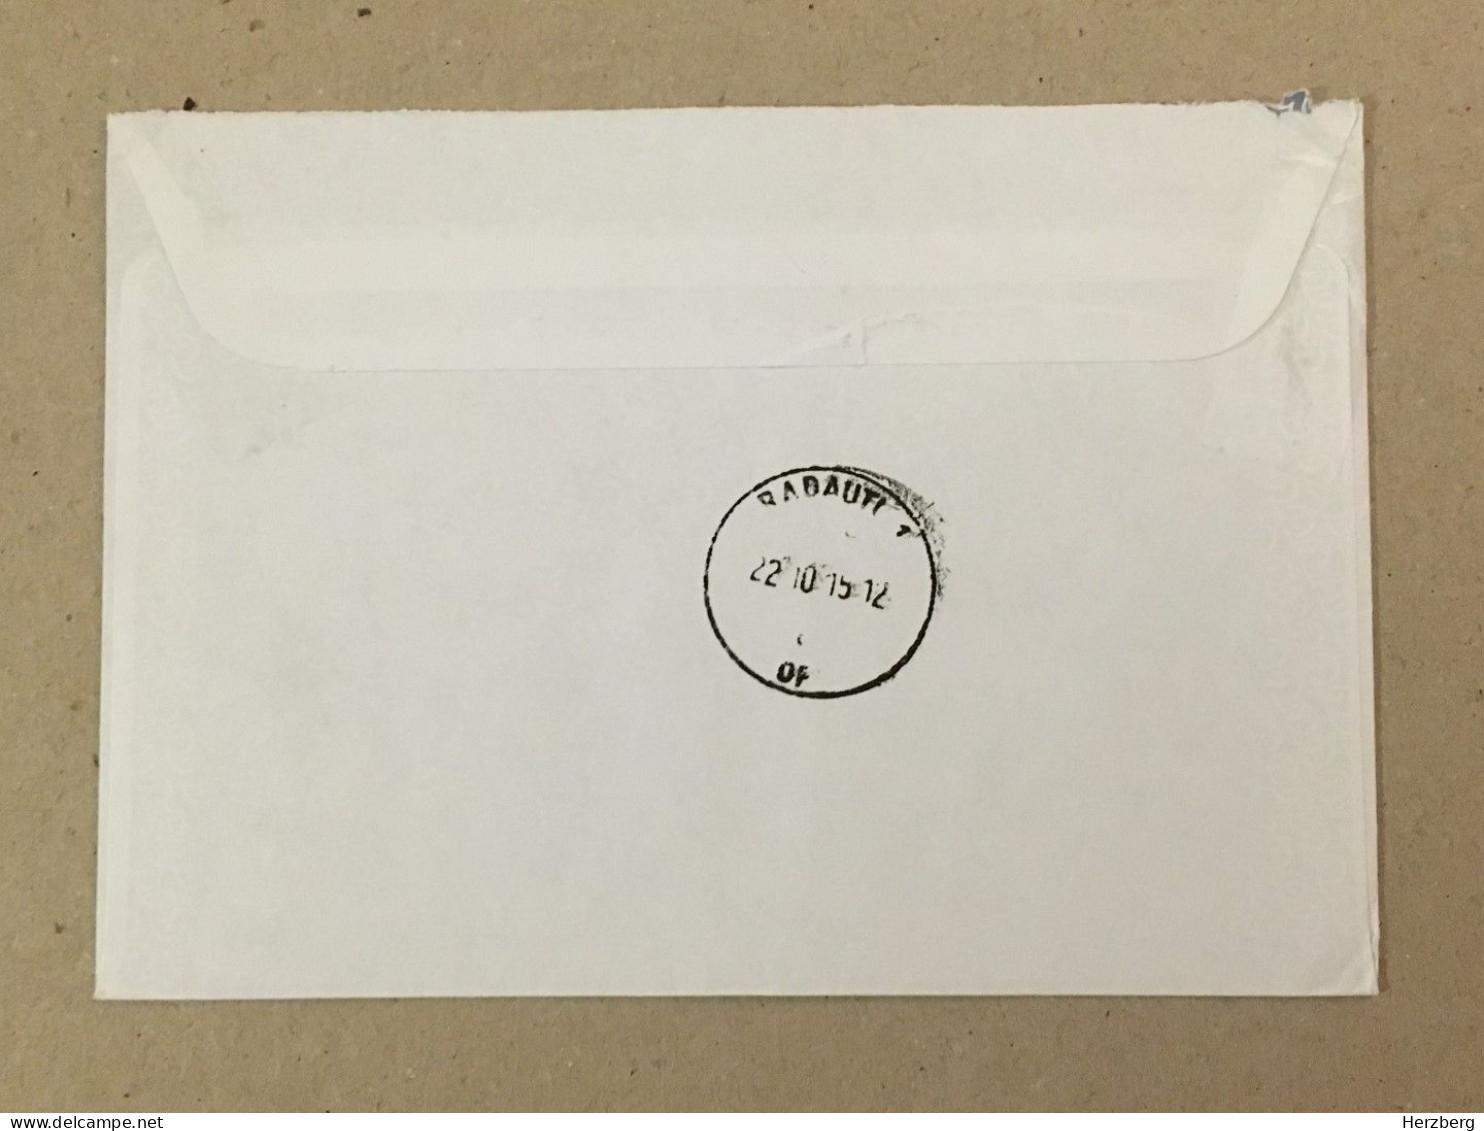 Hungary Magyarorszag Used Letter Stamp Circulated Cover Postal Label Printed Sticker Stamp 2015 - Lettres & Documents